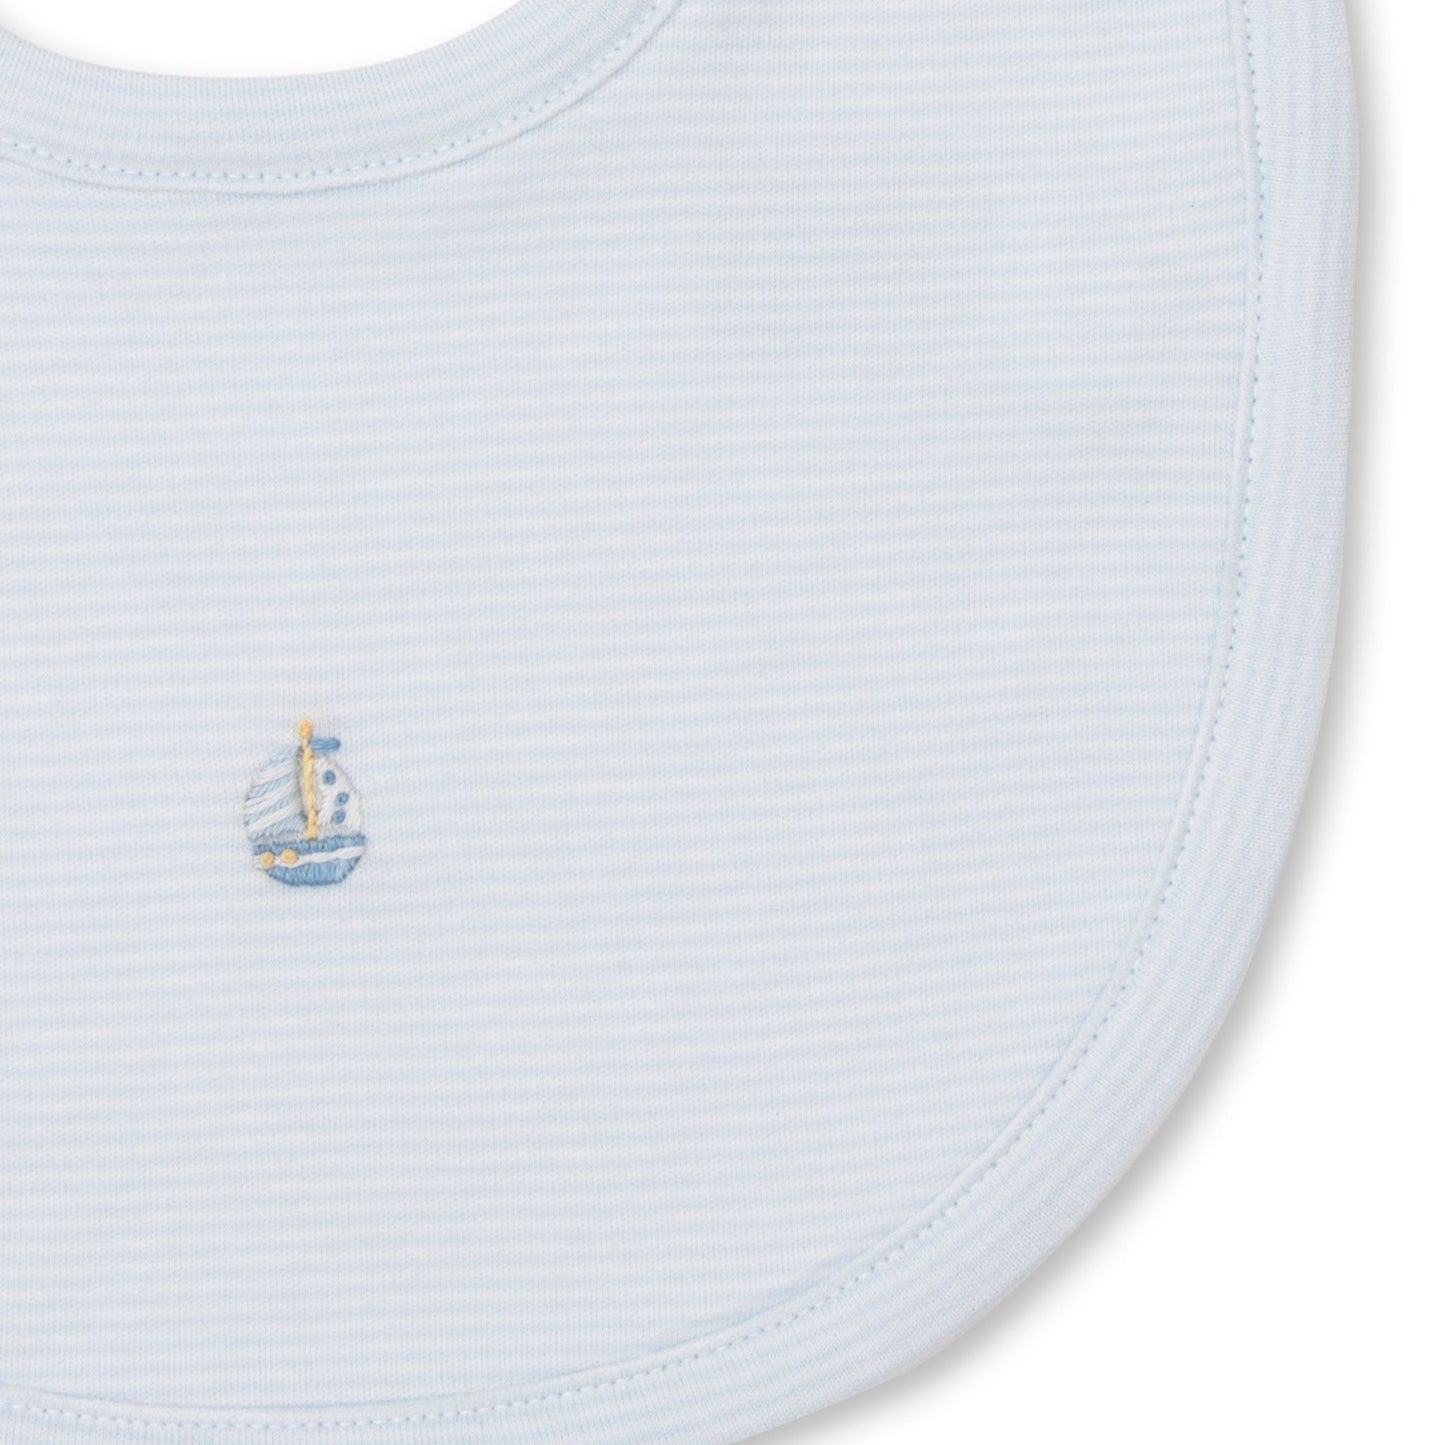 CLB Summer Medley Bib with Hand Embroidered Sailboats